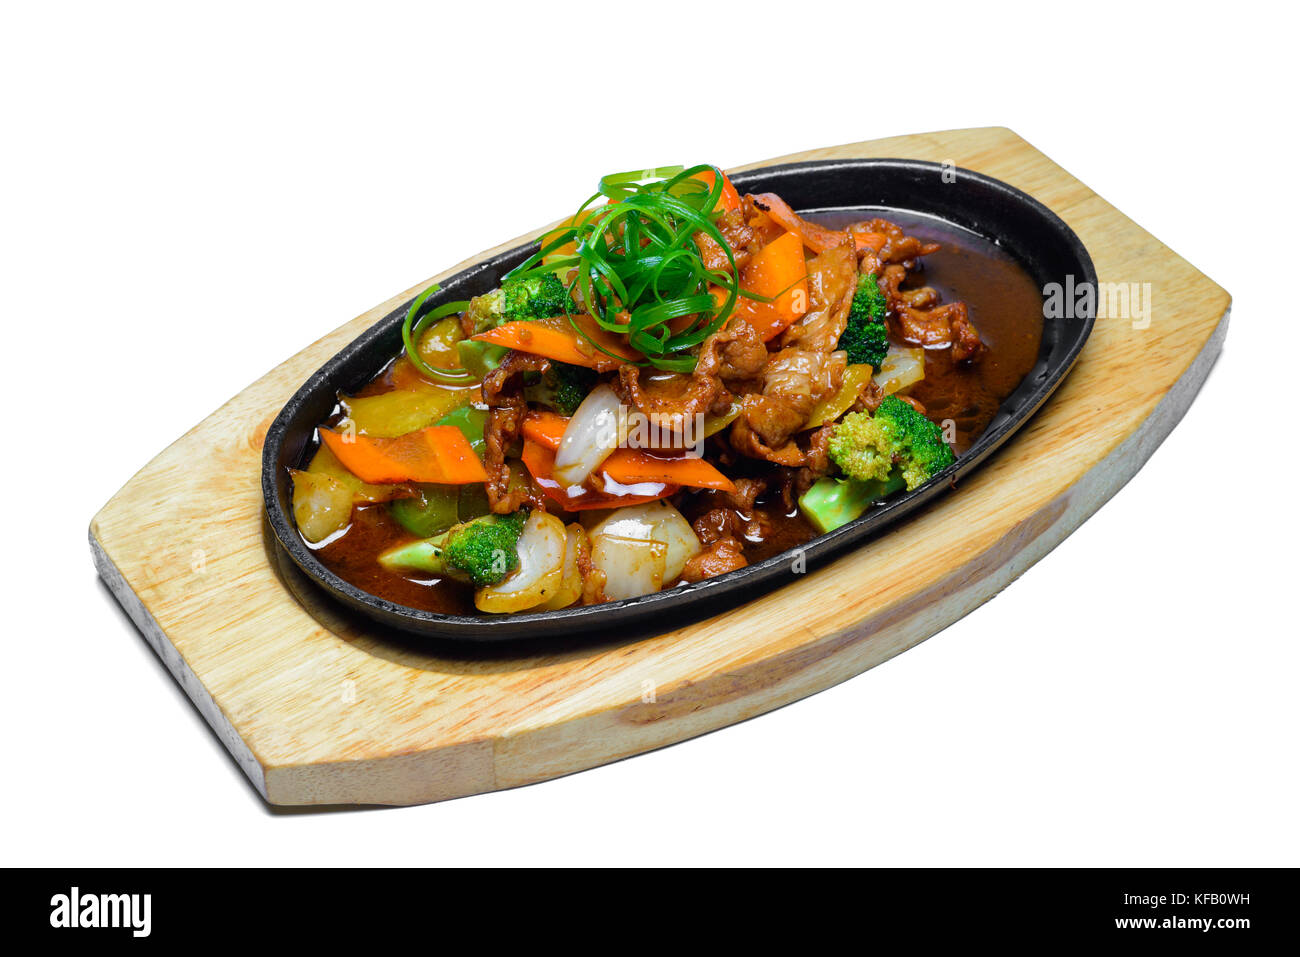 Korean meat on a wooden cutting board Stock Photo